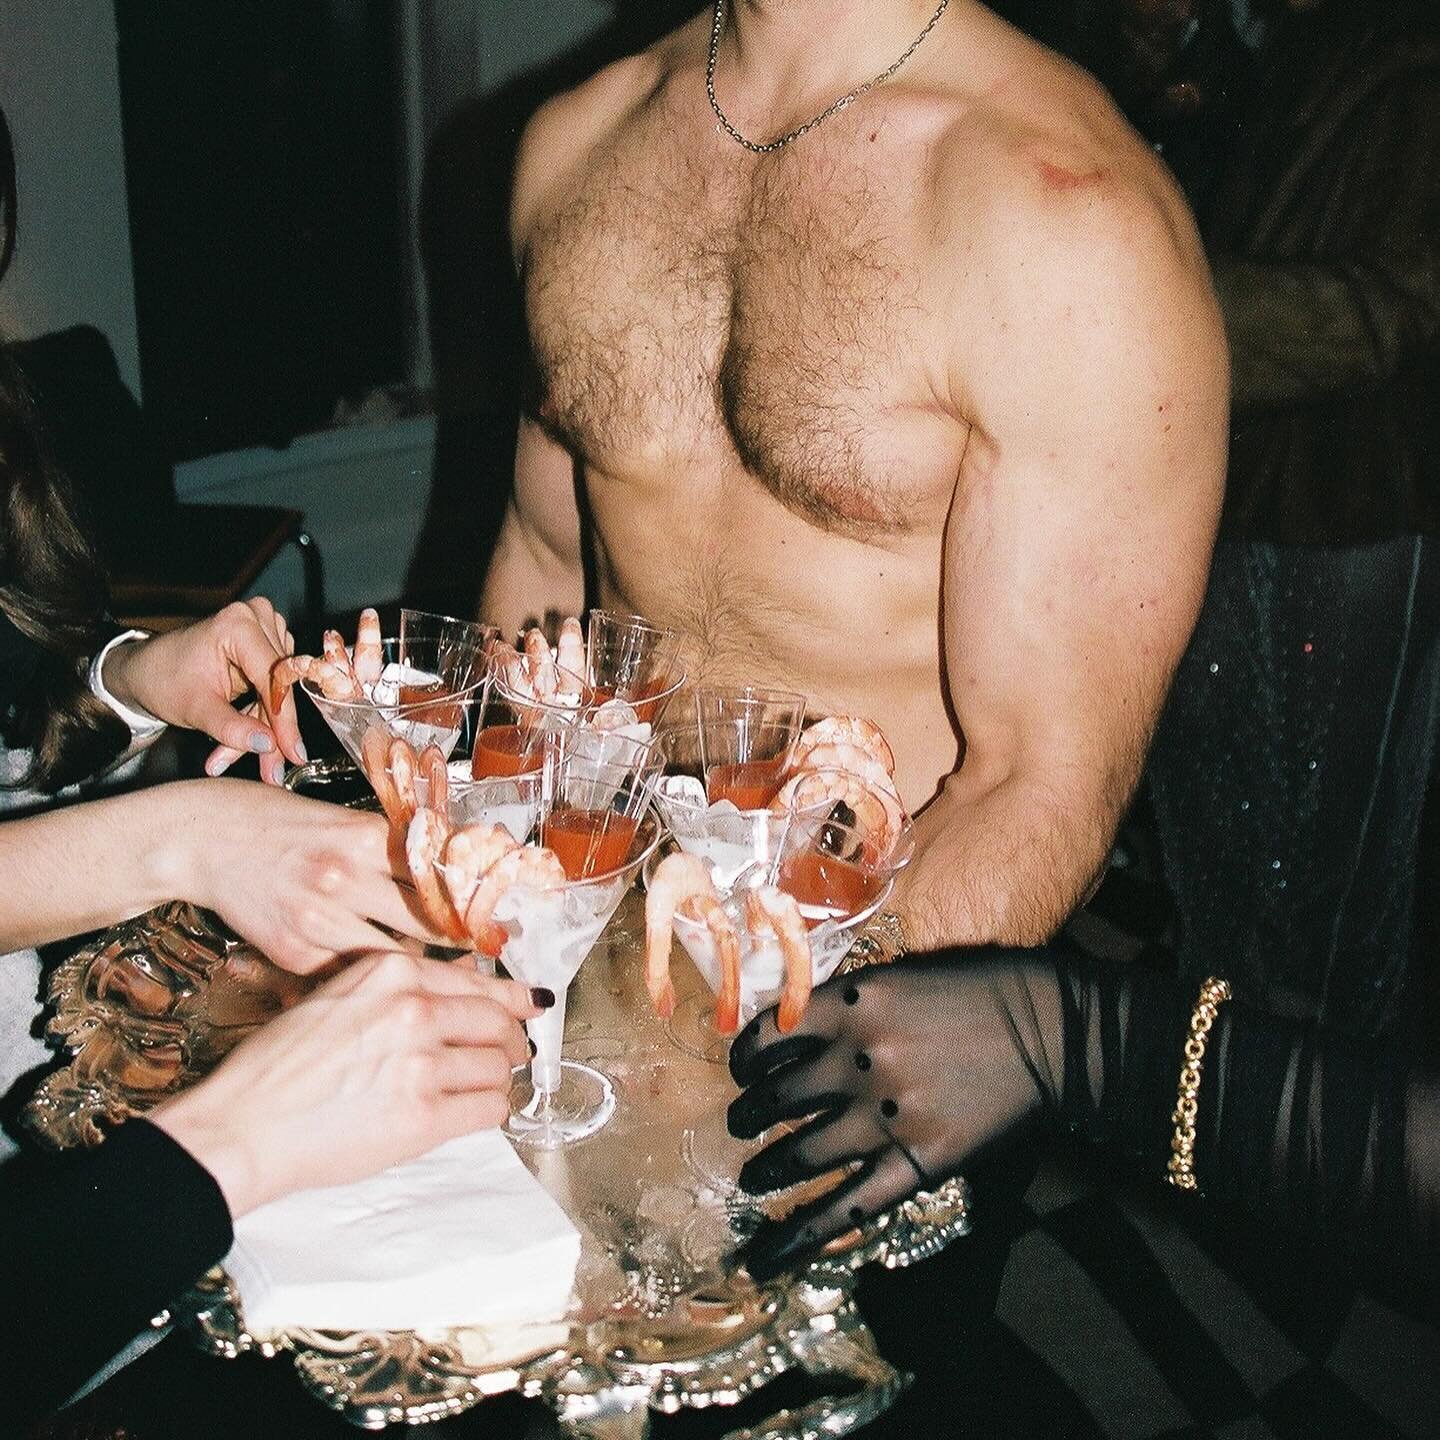 SERVING LOOKS AND SERVING APPS ‼️🔥🌶️ Bites served up by The Men of Burlesque at our High Society dinner &mdash; 
- Hot Cheeto trail mix
- Mac and cheese bites 
- Goat cheese tarts
- Bite sized baked potato
- Shrimp cocktail
- Melon caprese skewers
